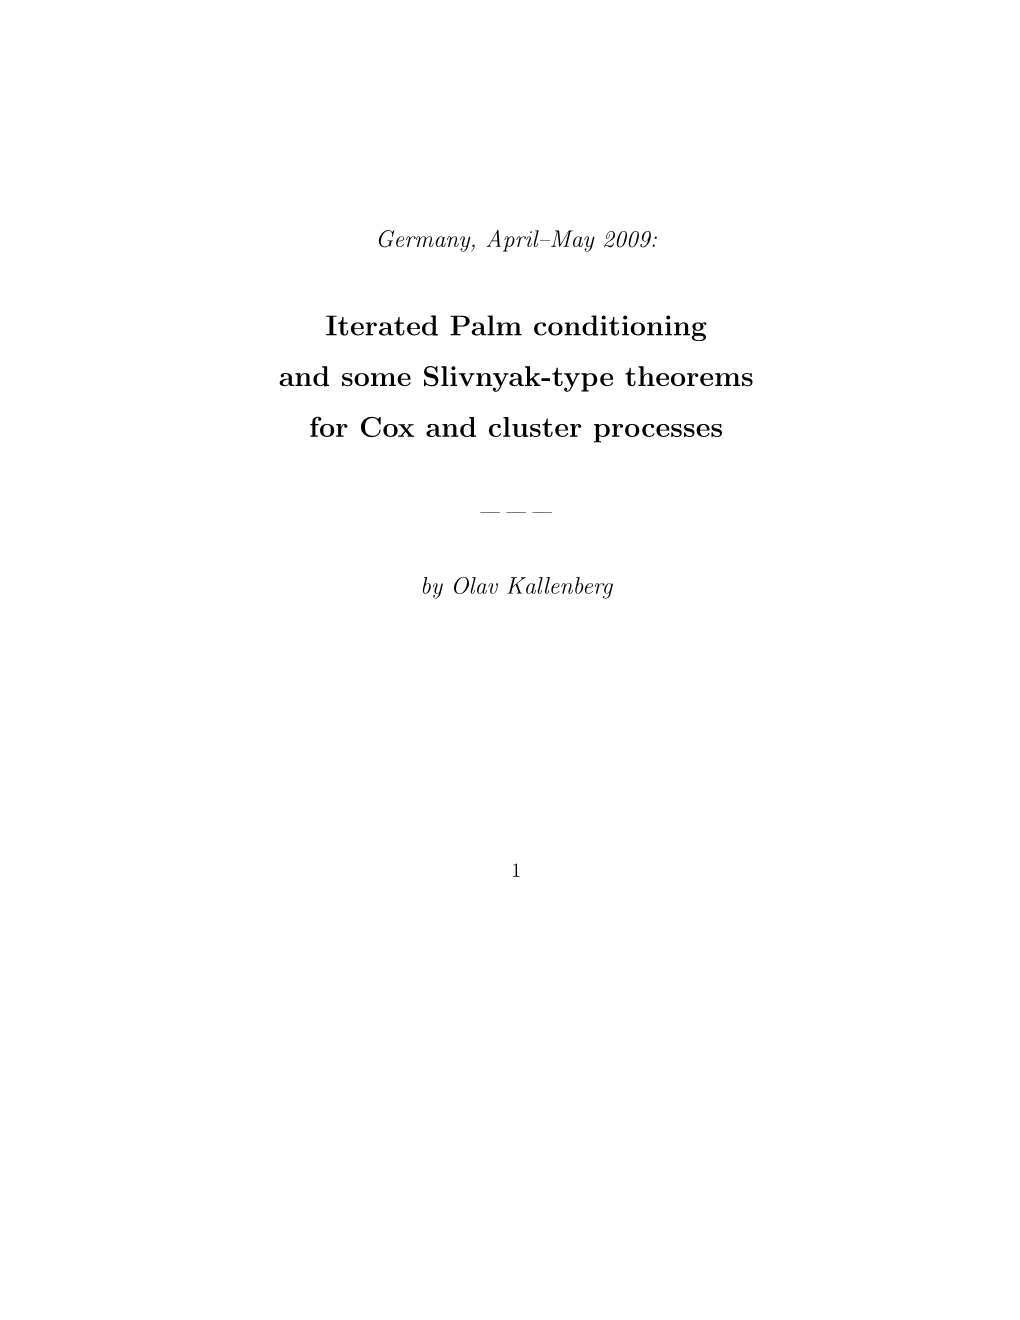 Iterated Palm Conditioning and Some Slivnyak-Type Theorems for Cox and Cluster Processes